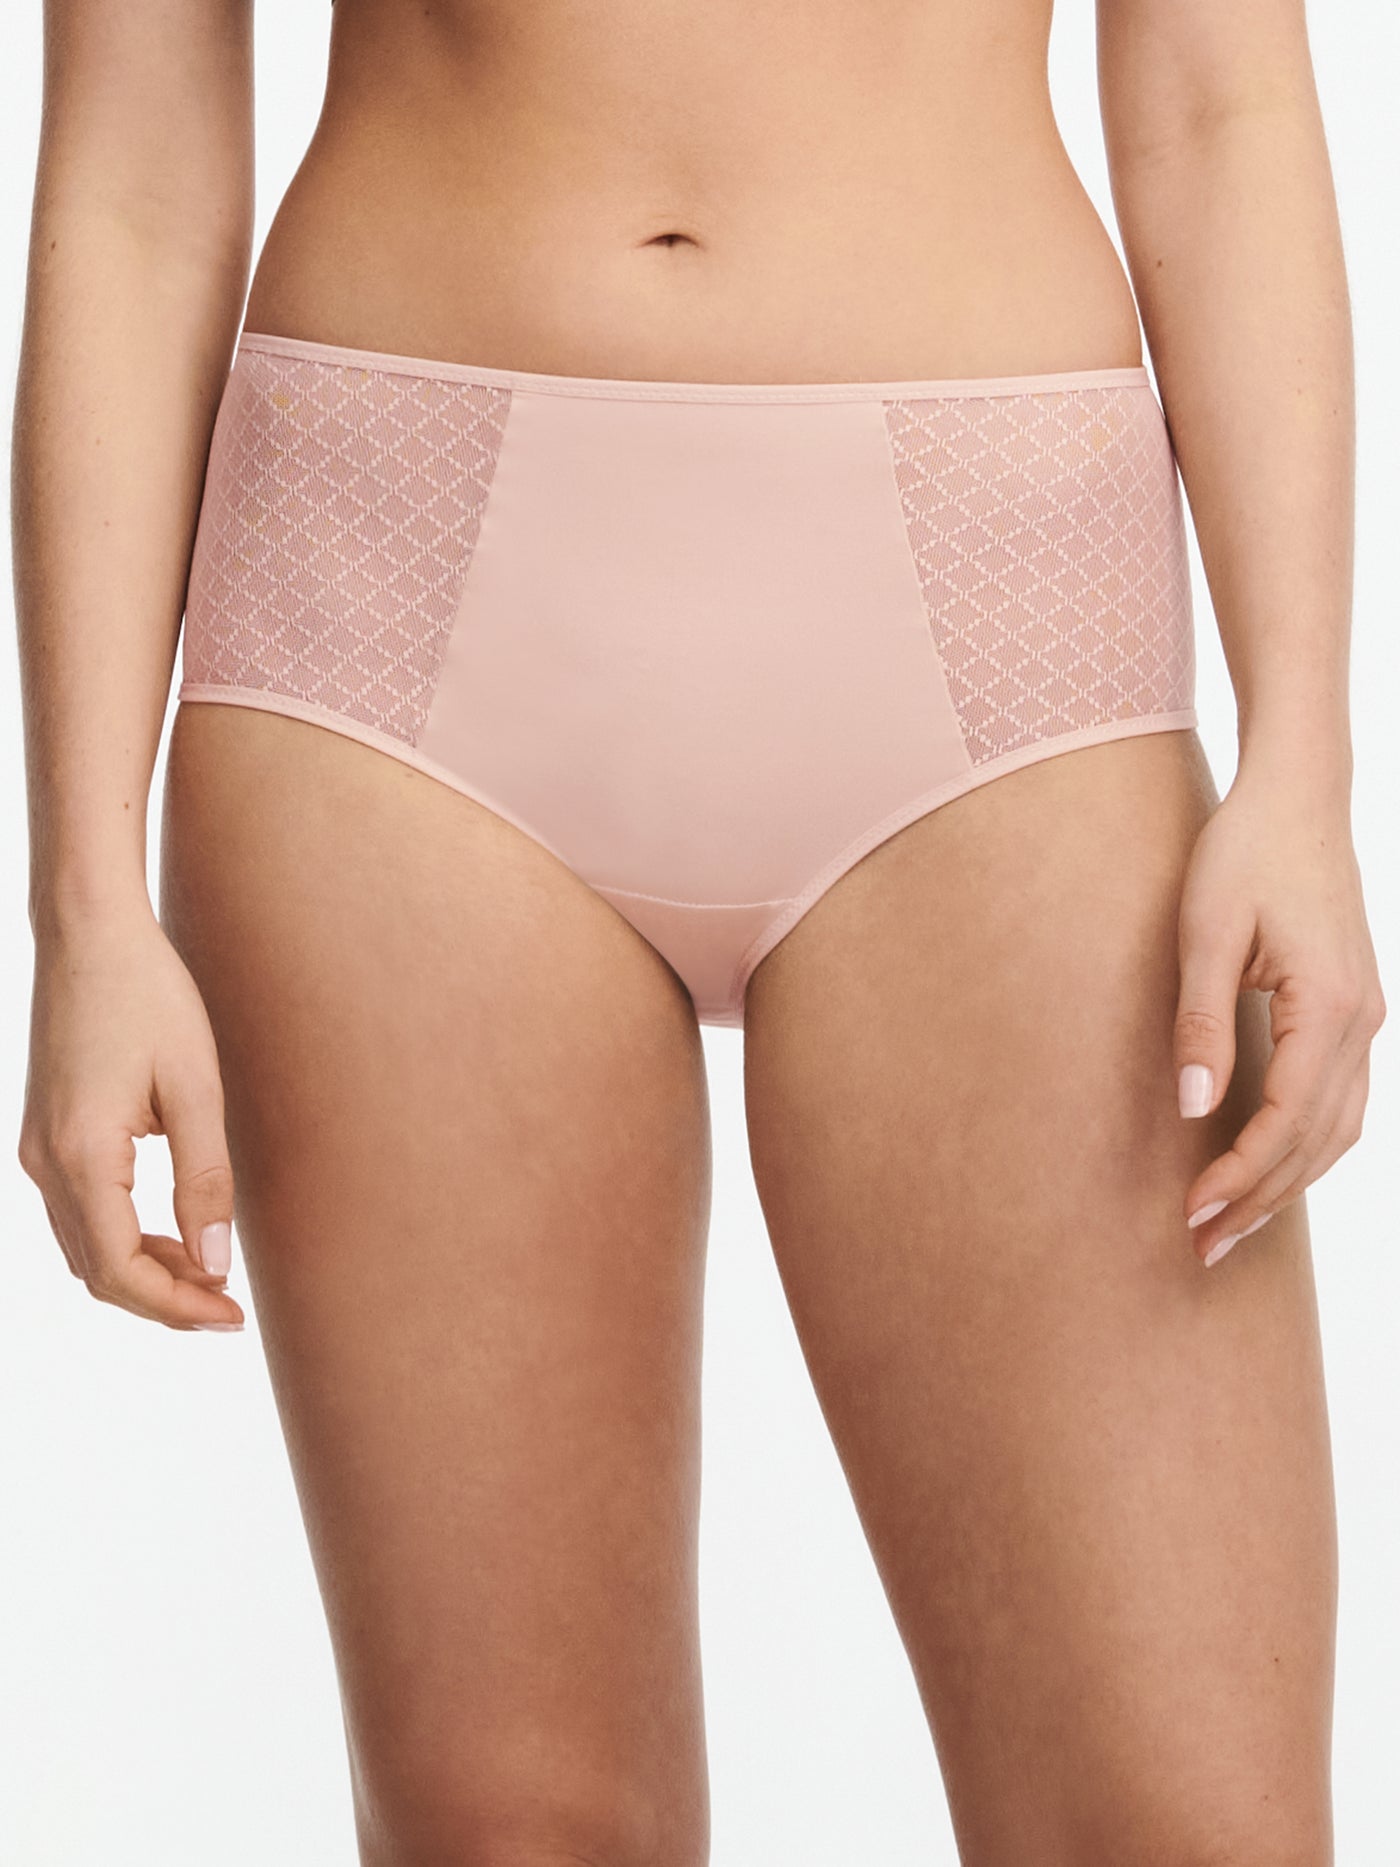 Chantelle Norah Chic High-waisted Full brief Dusky pink